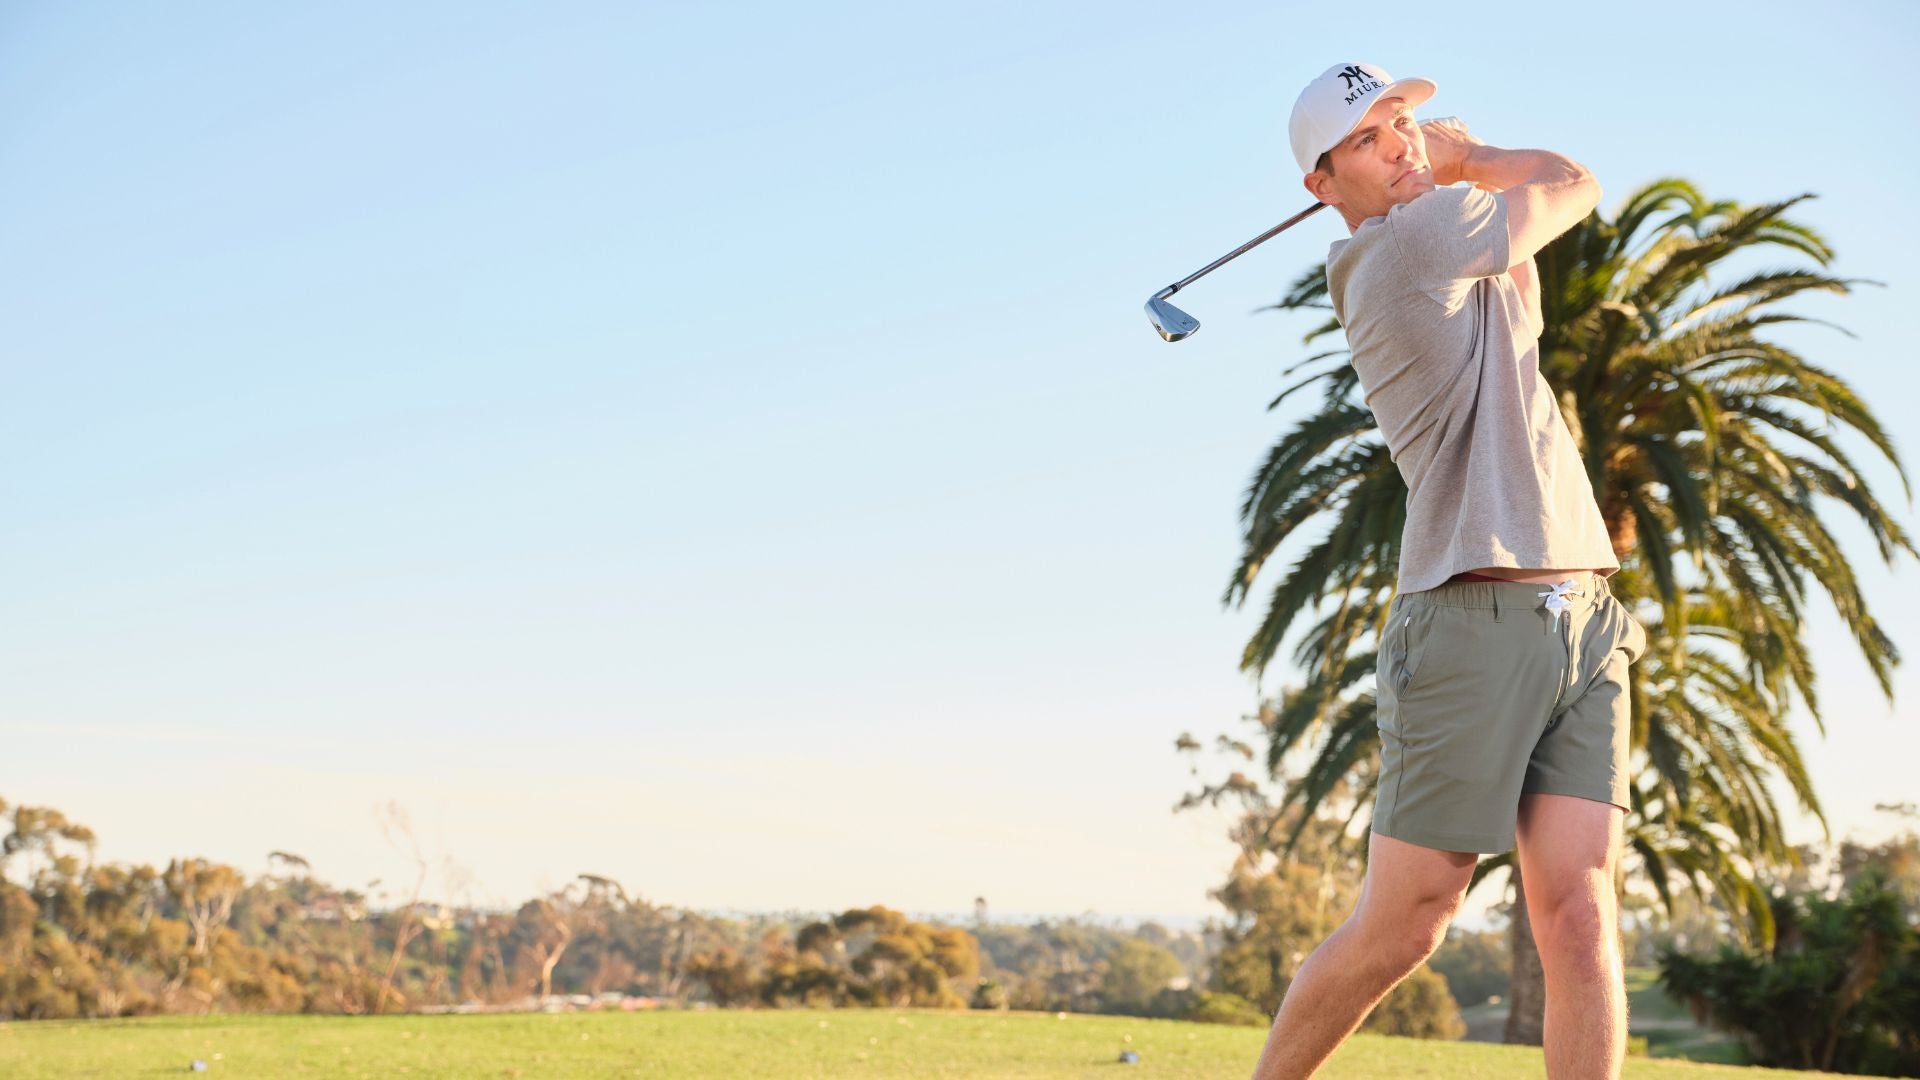 Top Tips for Improving Your Time at the Driving Range